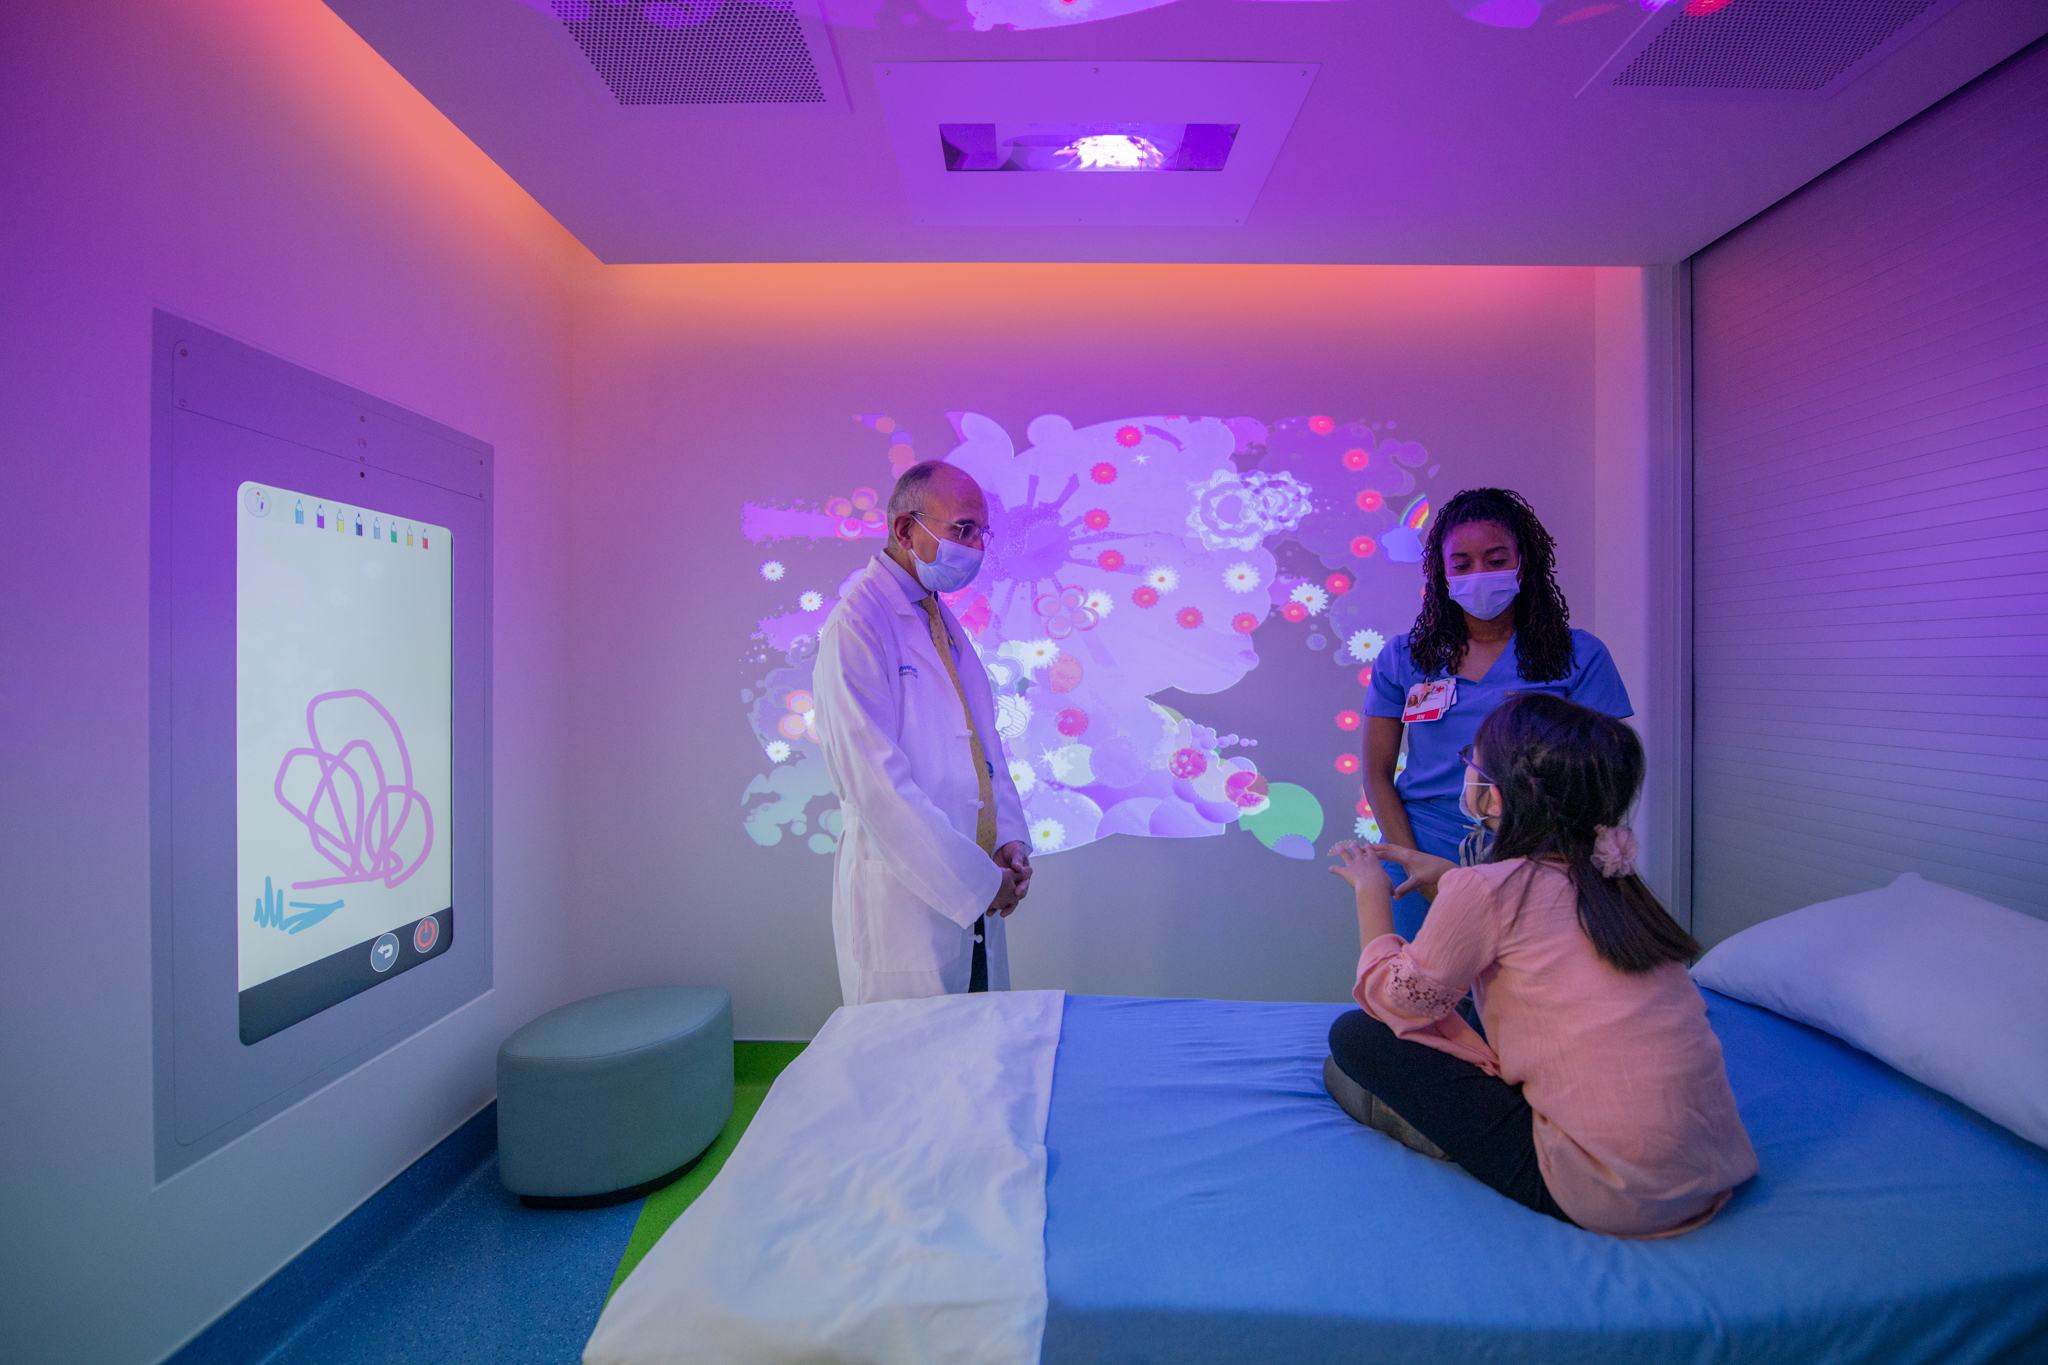 Dallas, Baltimore children’s hospitals embrace high-tech features in behavioral health areas to promote calmness